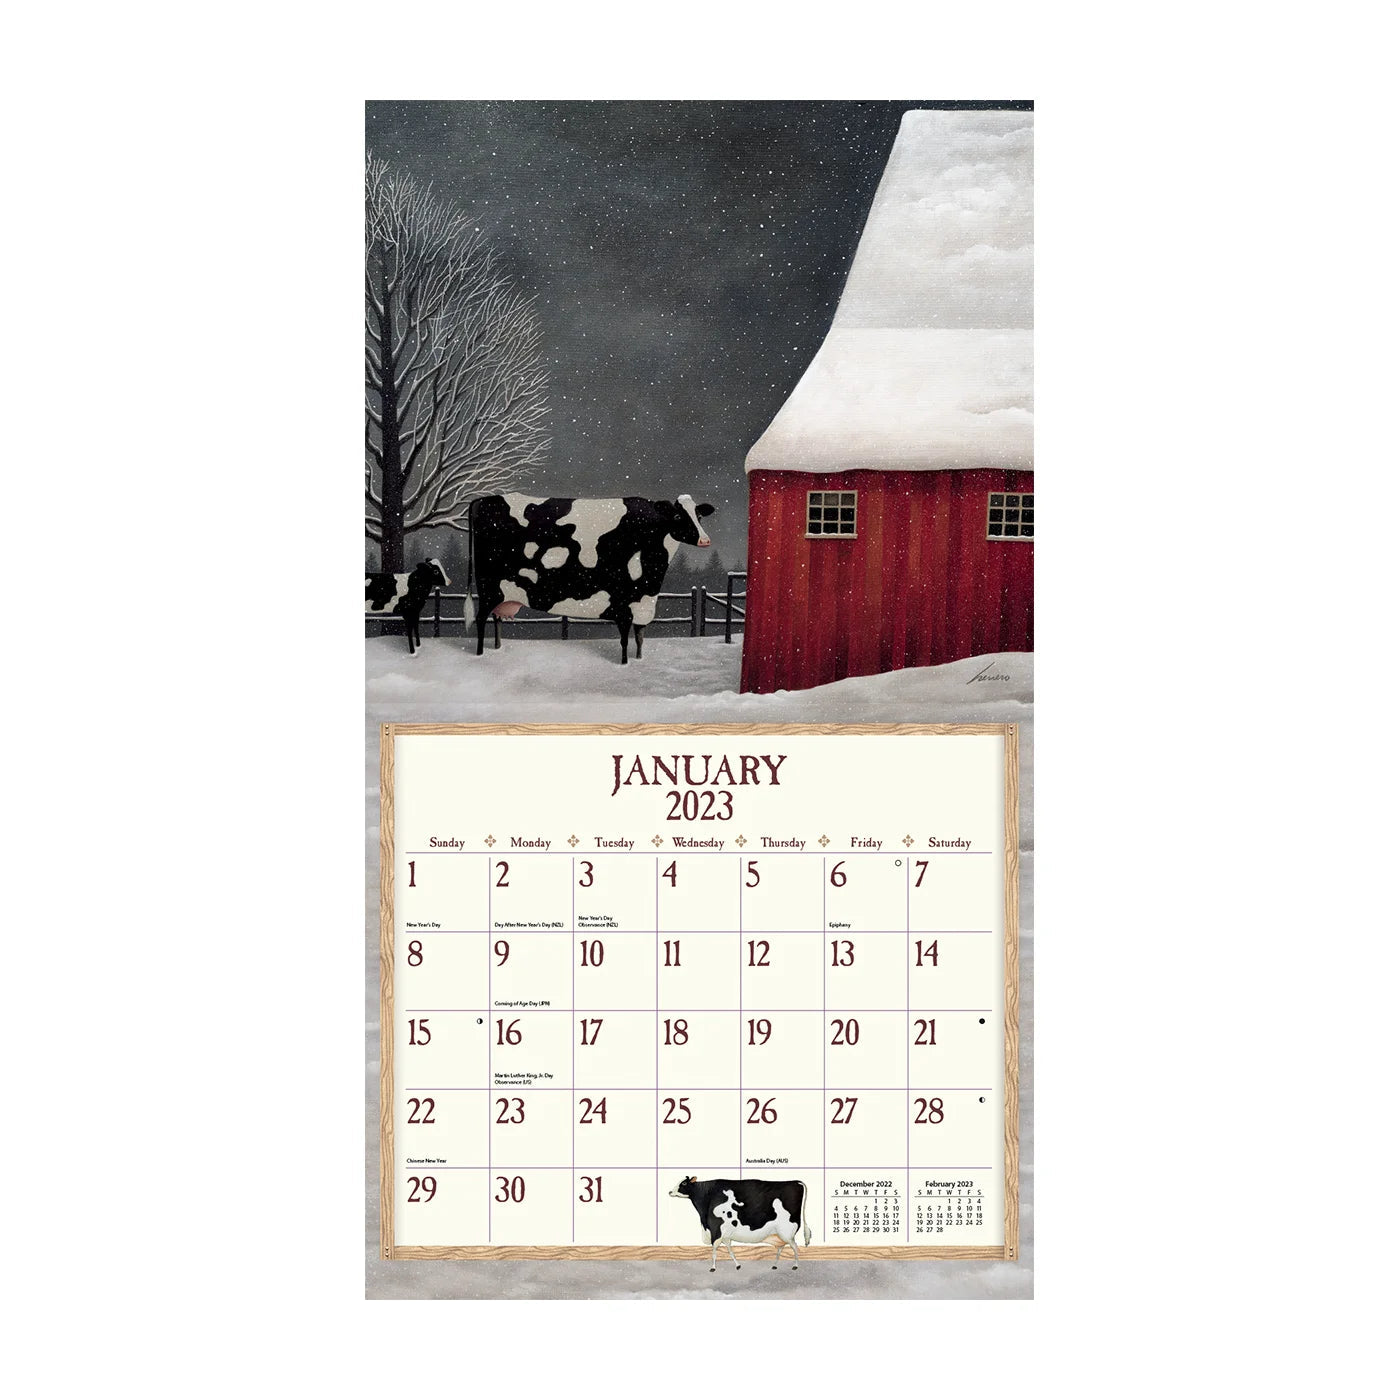 2023 LANG Cows Cows Cows by Lowell Herrero - Deluxe Wall Calendar